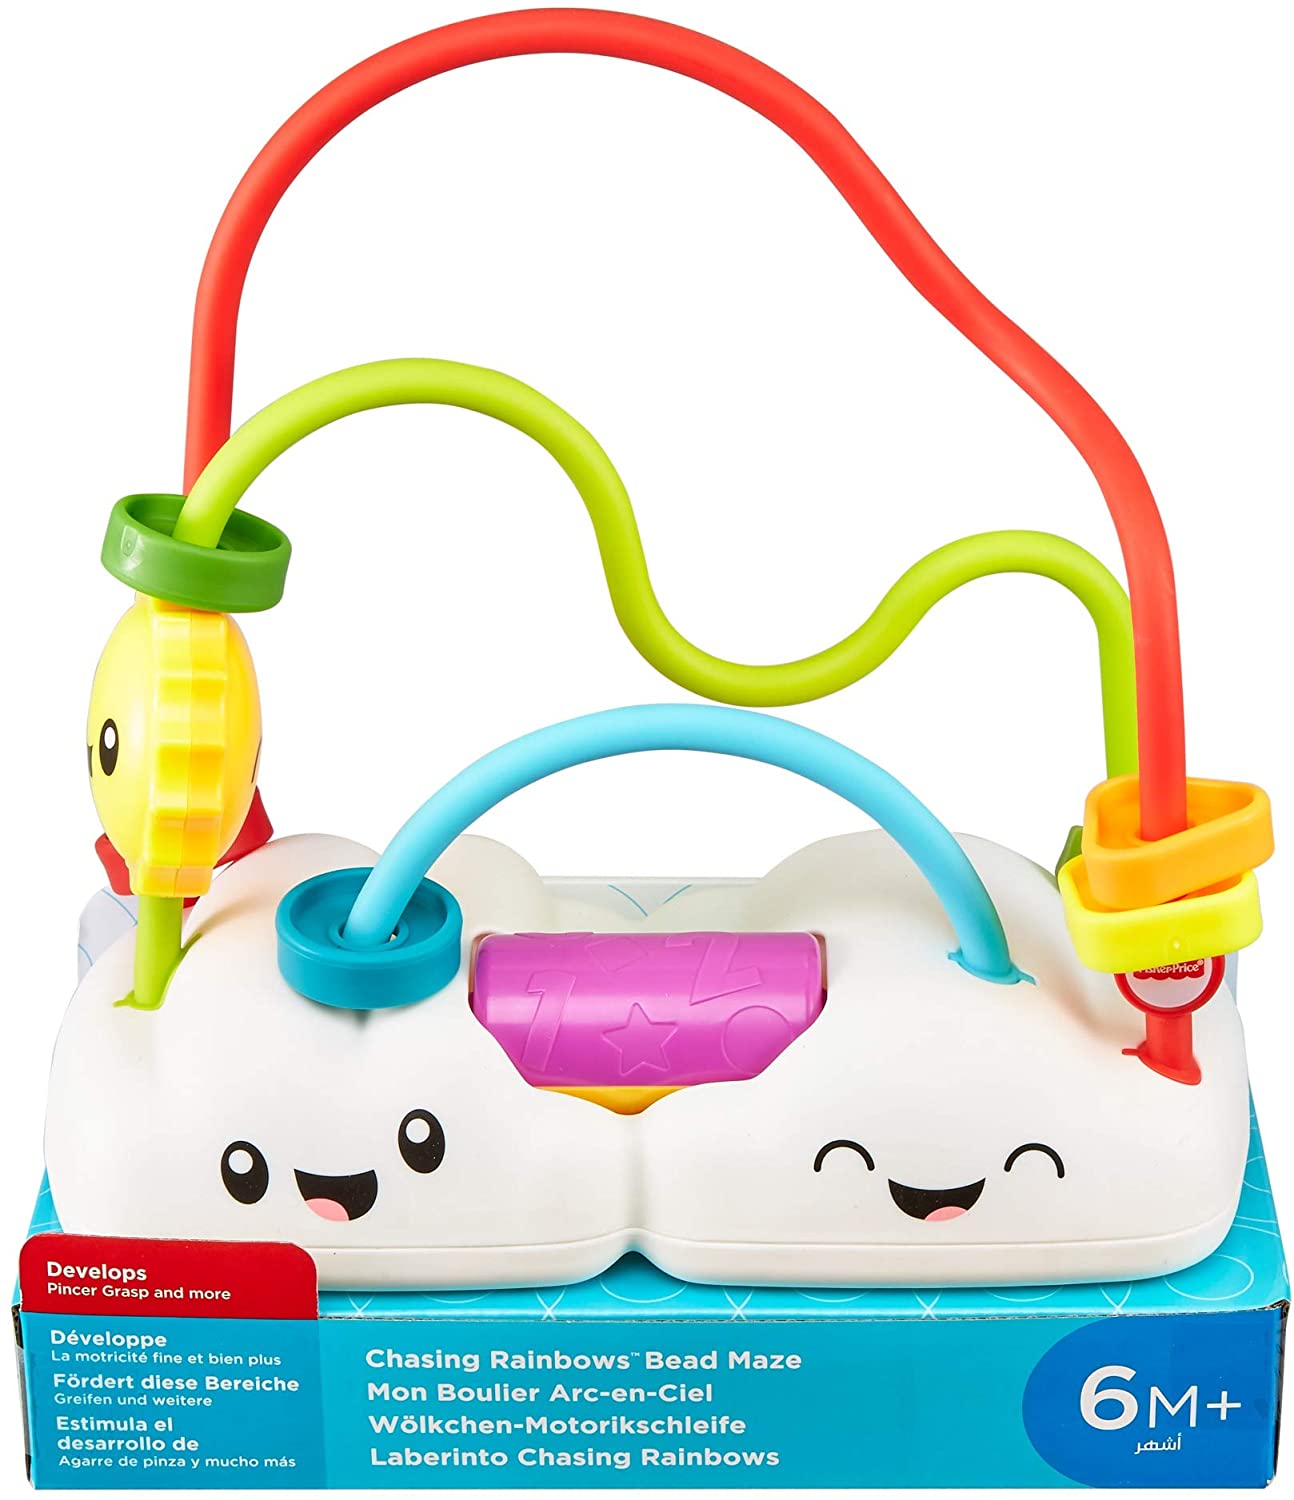 Fisher-Price Chasing Rainbows Bead Maze - Spin The Sun, Hear Exciting Clicking Sounds!